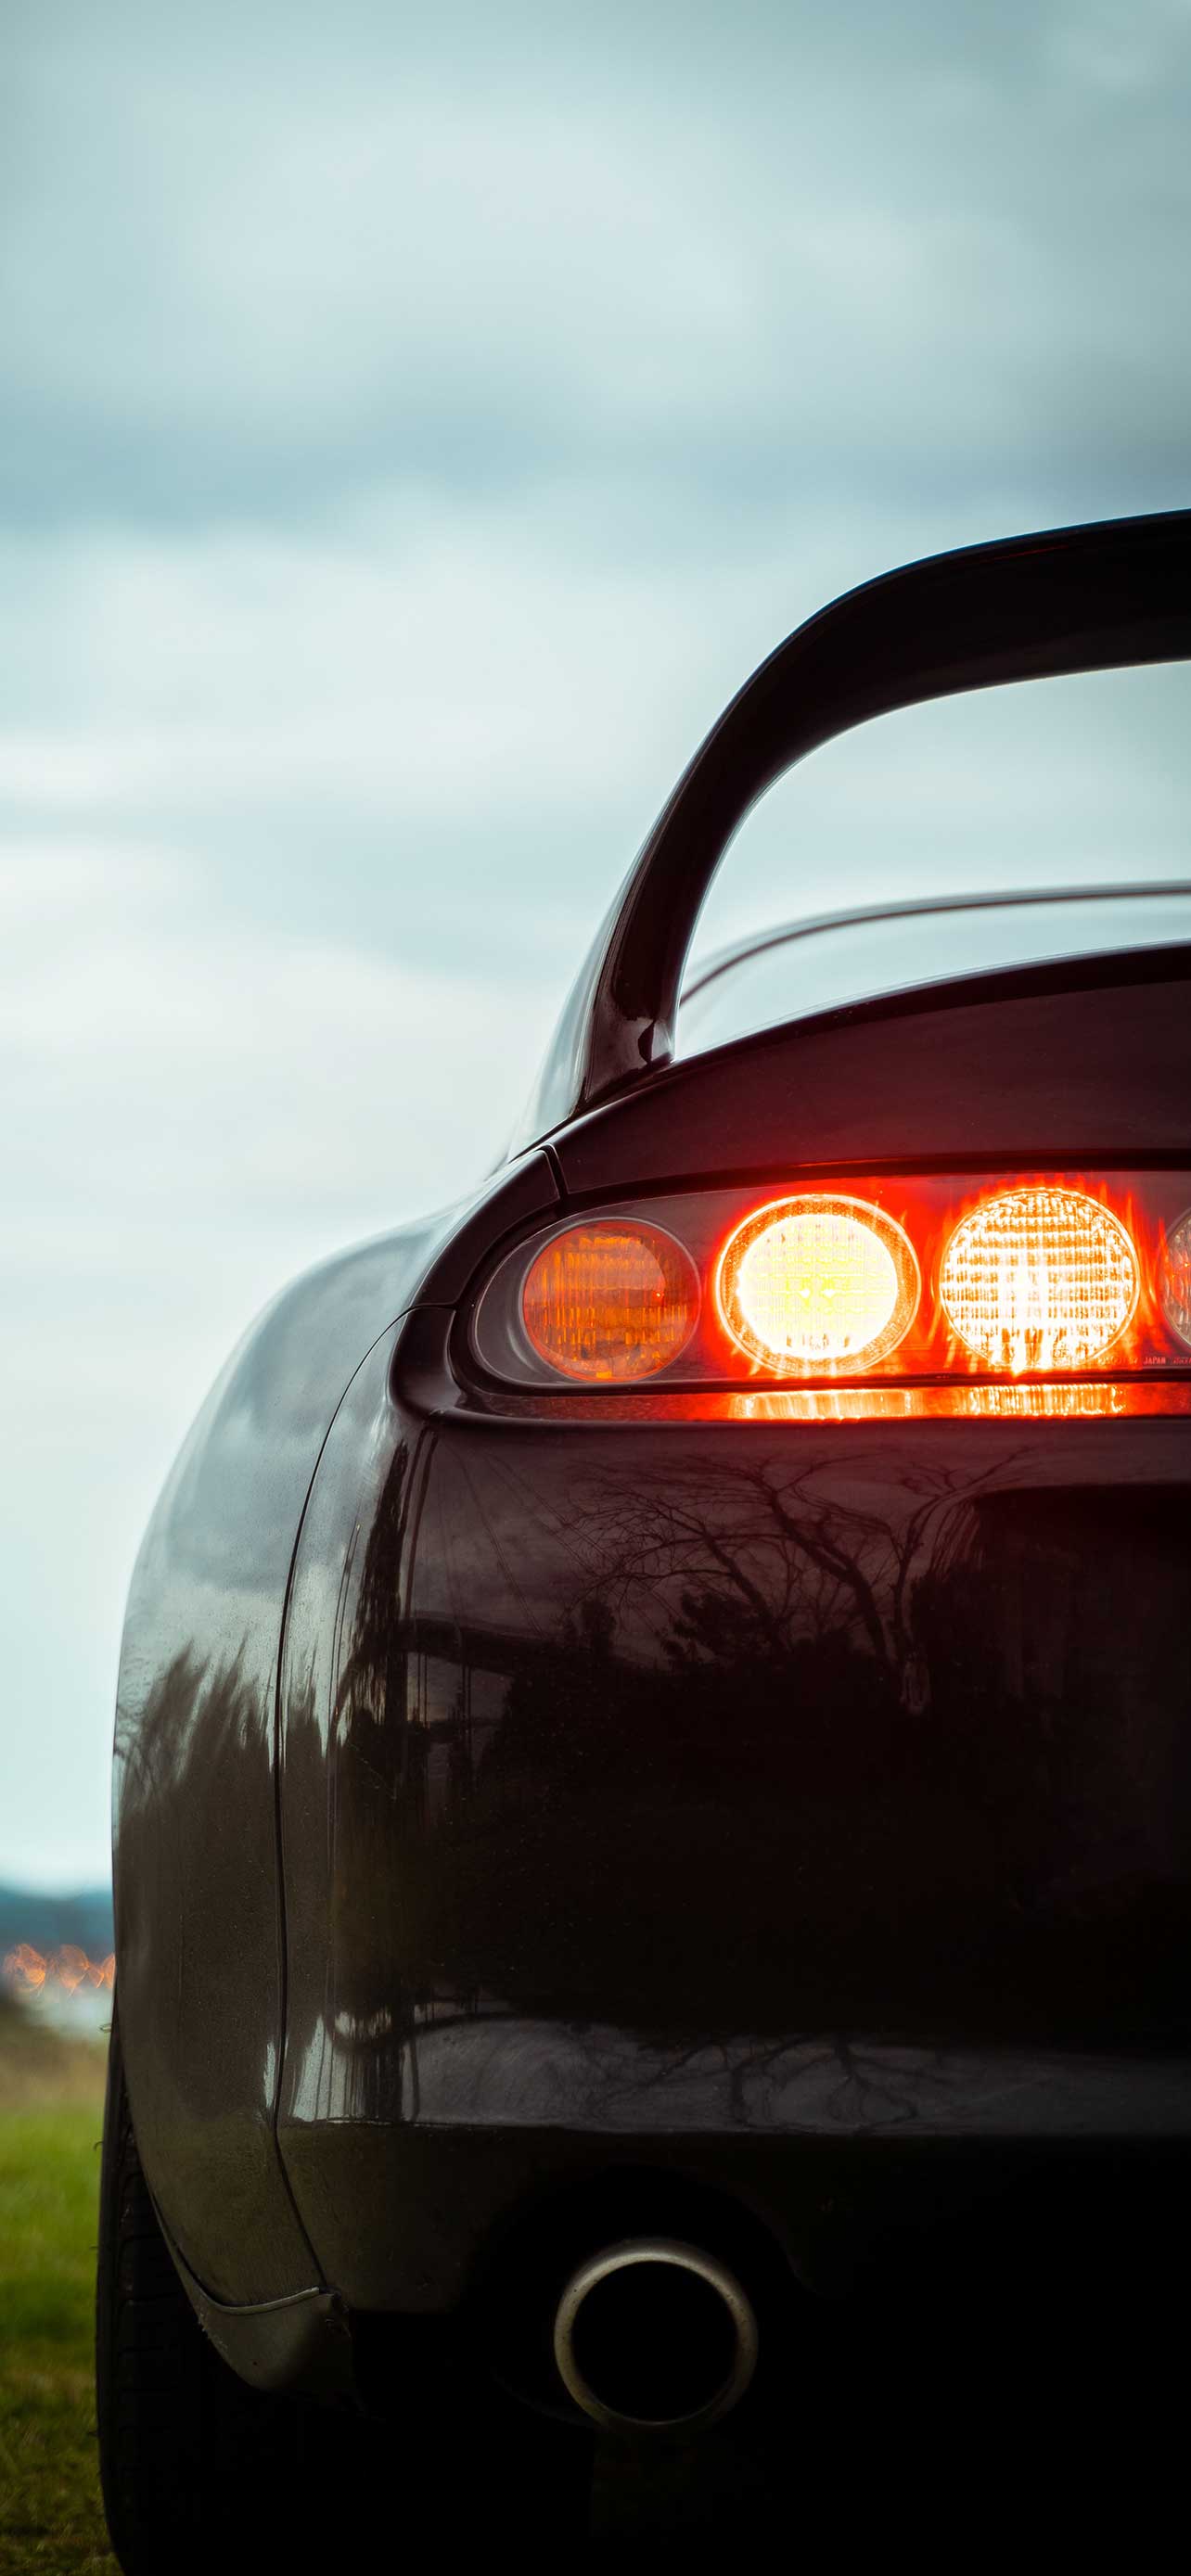 taillights of toyota supra mk4 4k jdm car wallpapers for iphone